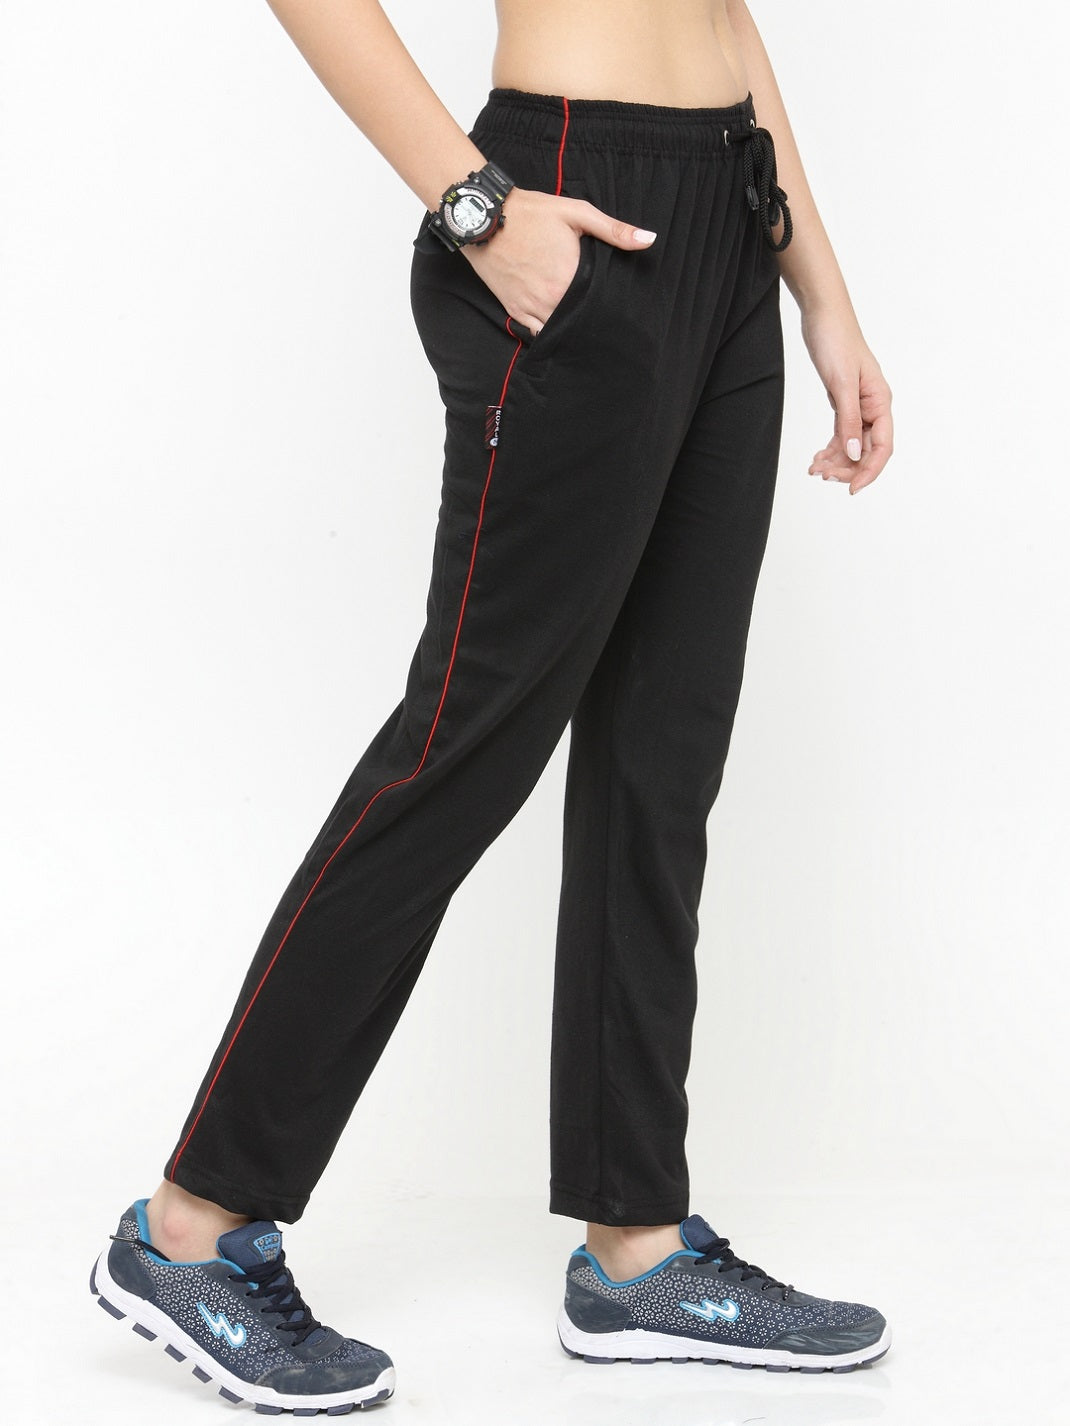 Women Jogging Running Breathable Trousers Dry - Pastel Red